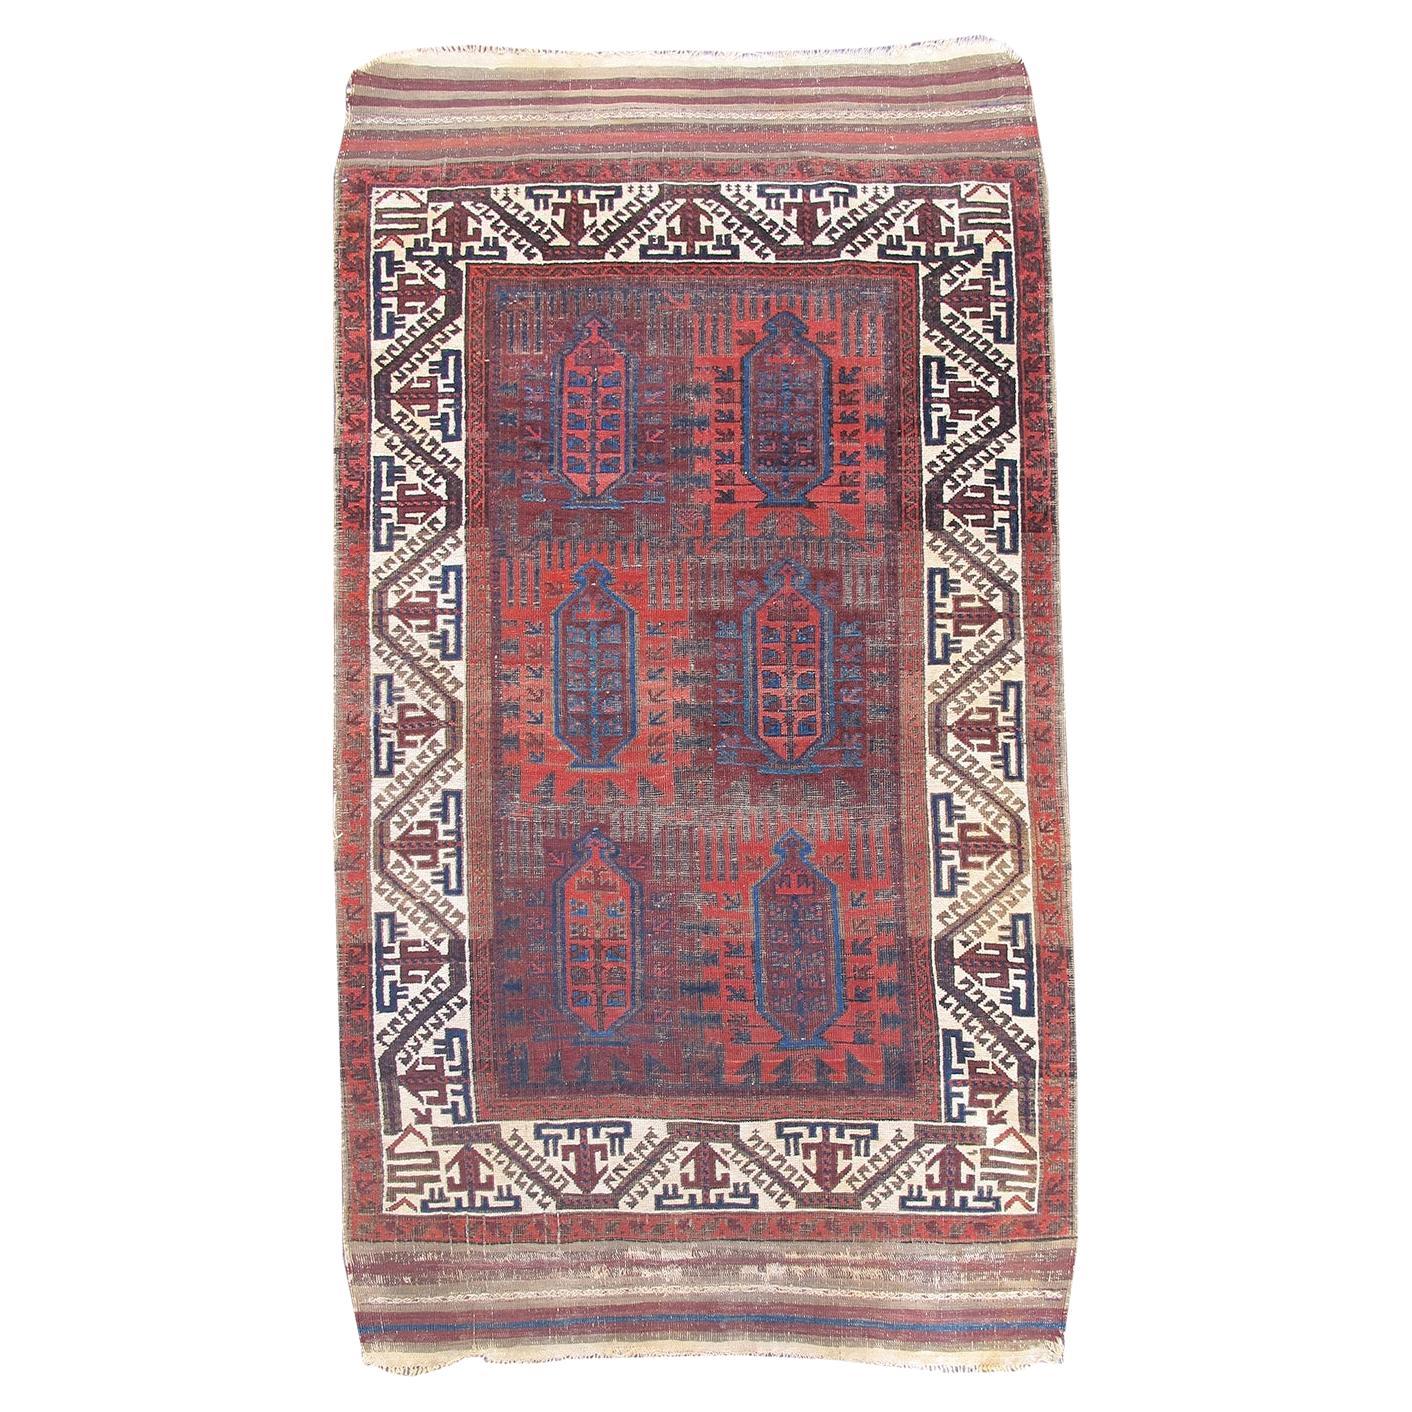 Antique Persian Baluch Rug, Late 19th Century